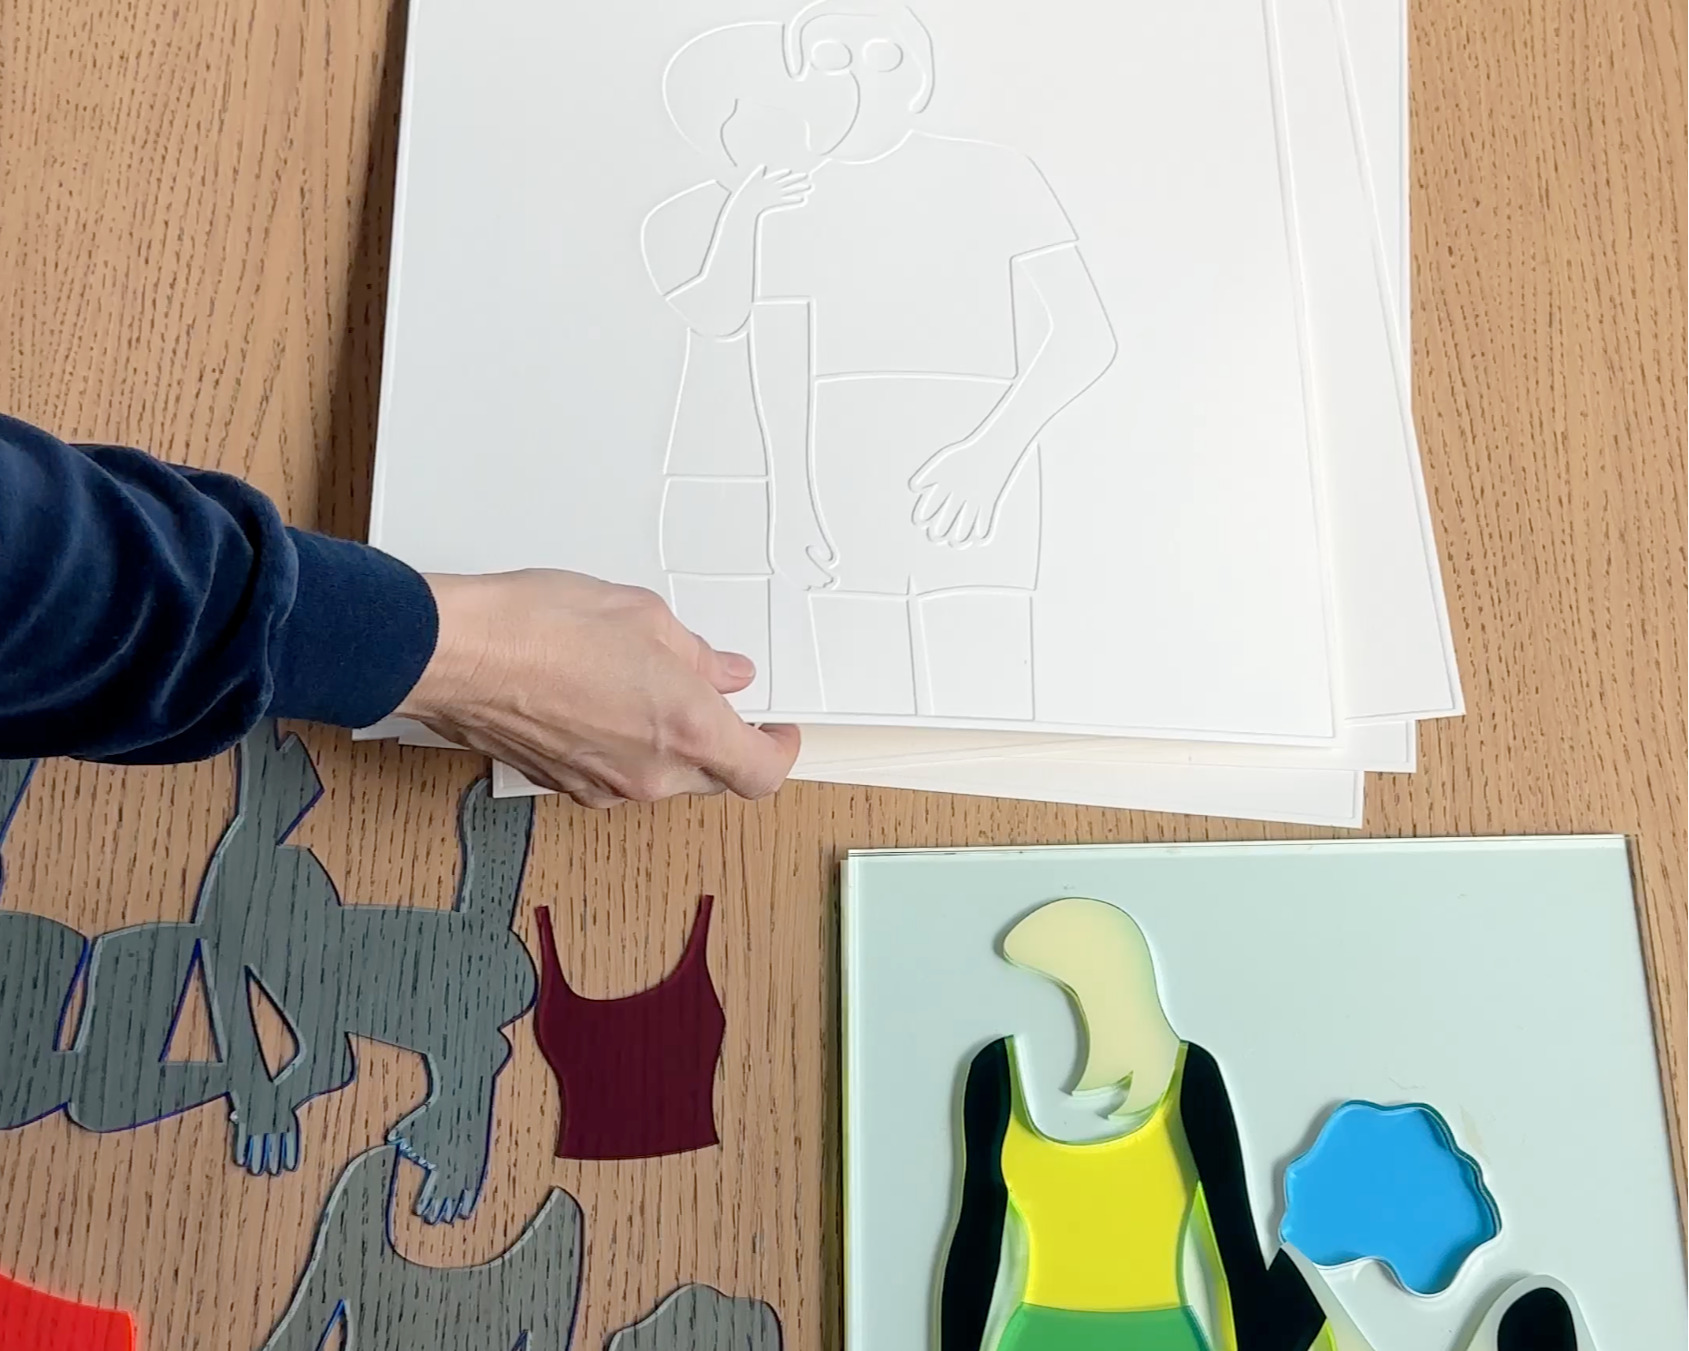 Artist Dana Bell placing a white print on a table next to acrylic cut-outs.